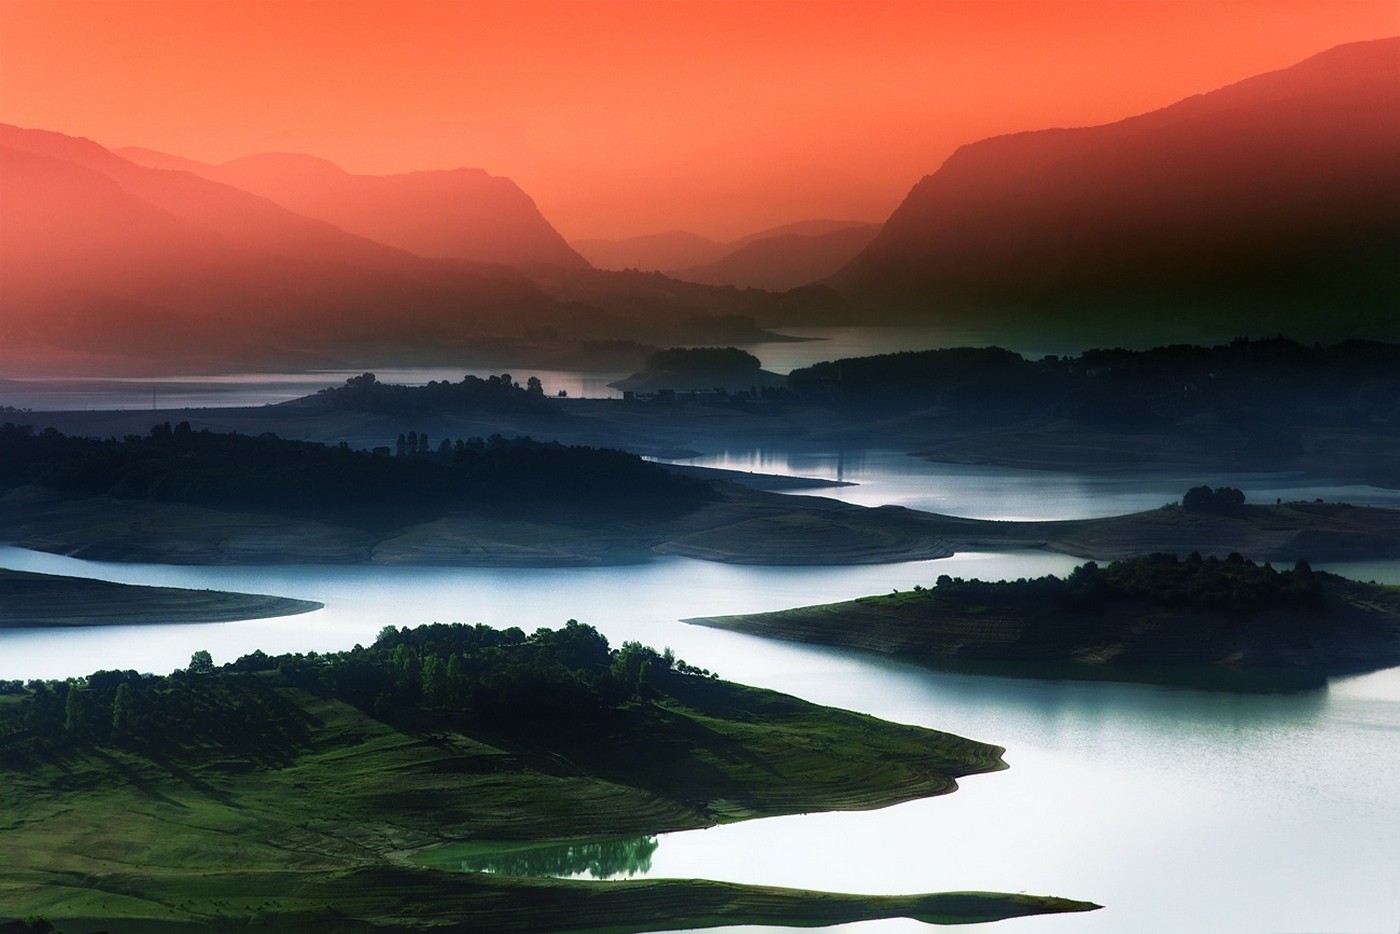 Nature Landscape Lake Mountains Mist Red Sky Blue Water Green Field Trees Bosnia And Herzegovina 1400x934